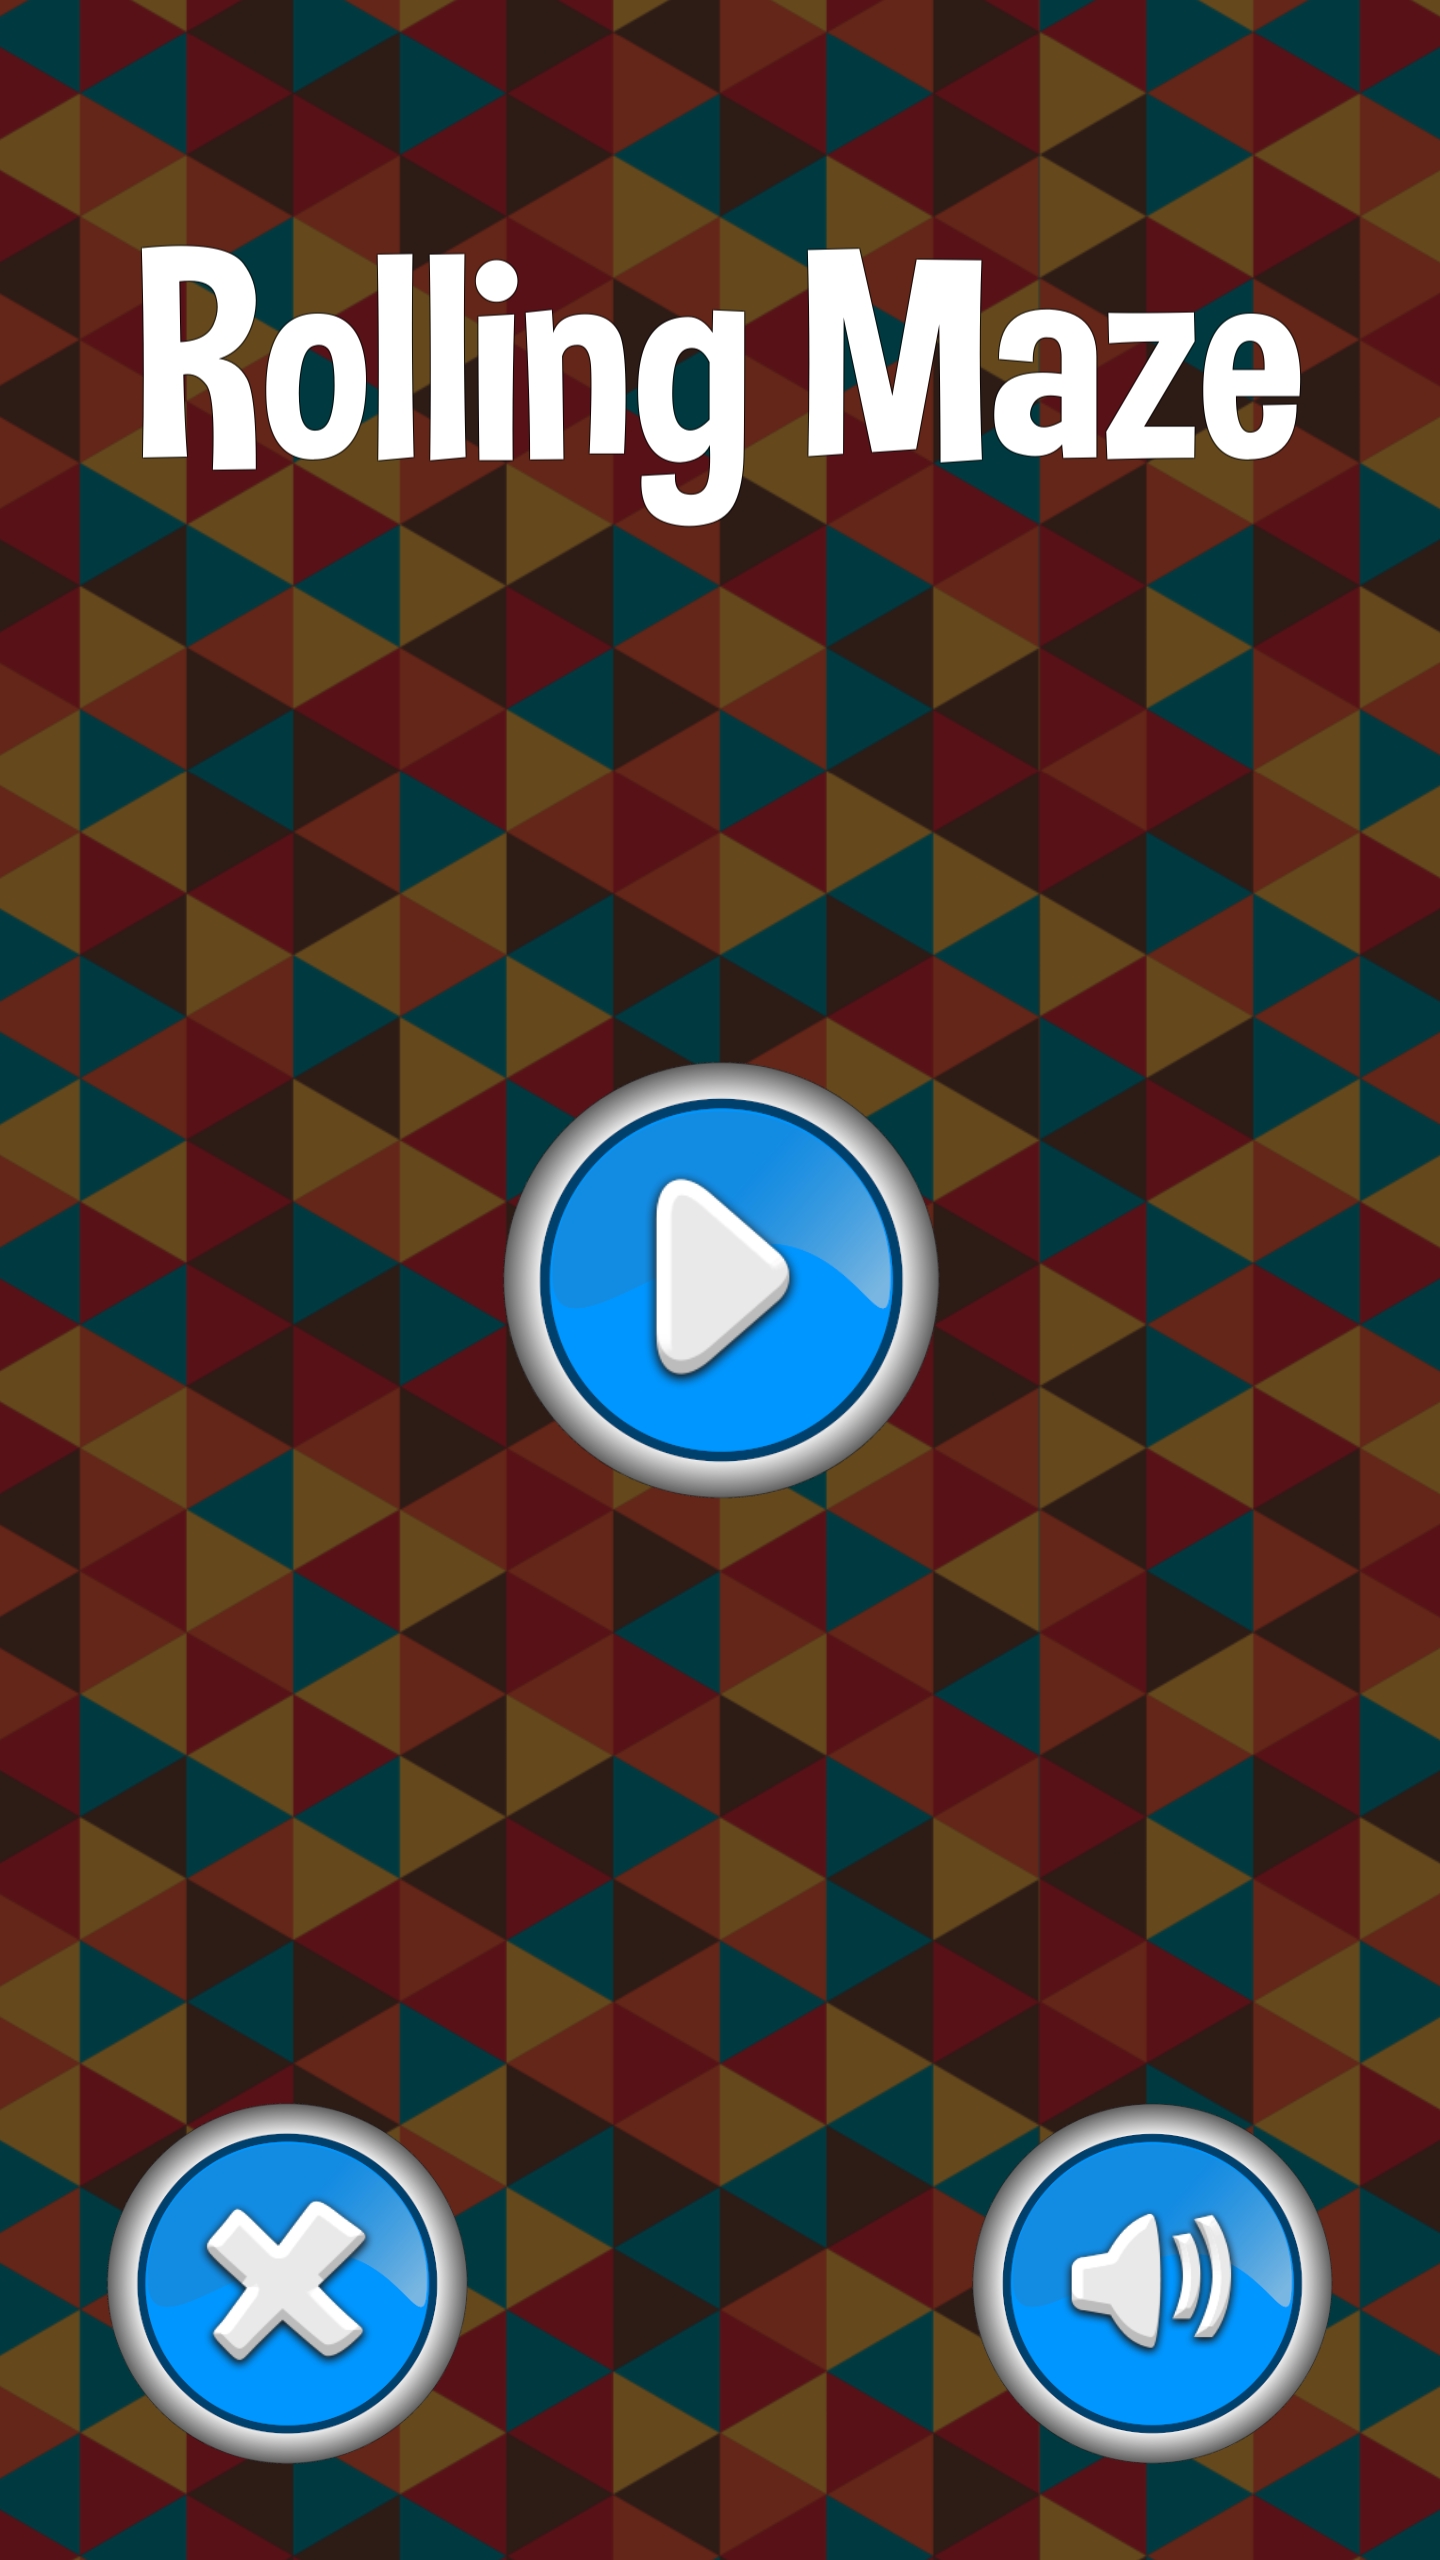 Rolling Maze - balls rotate - complete project puzzle game